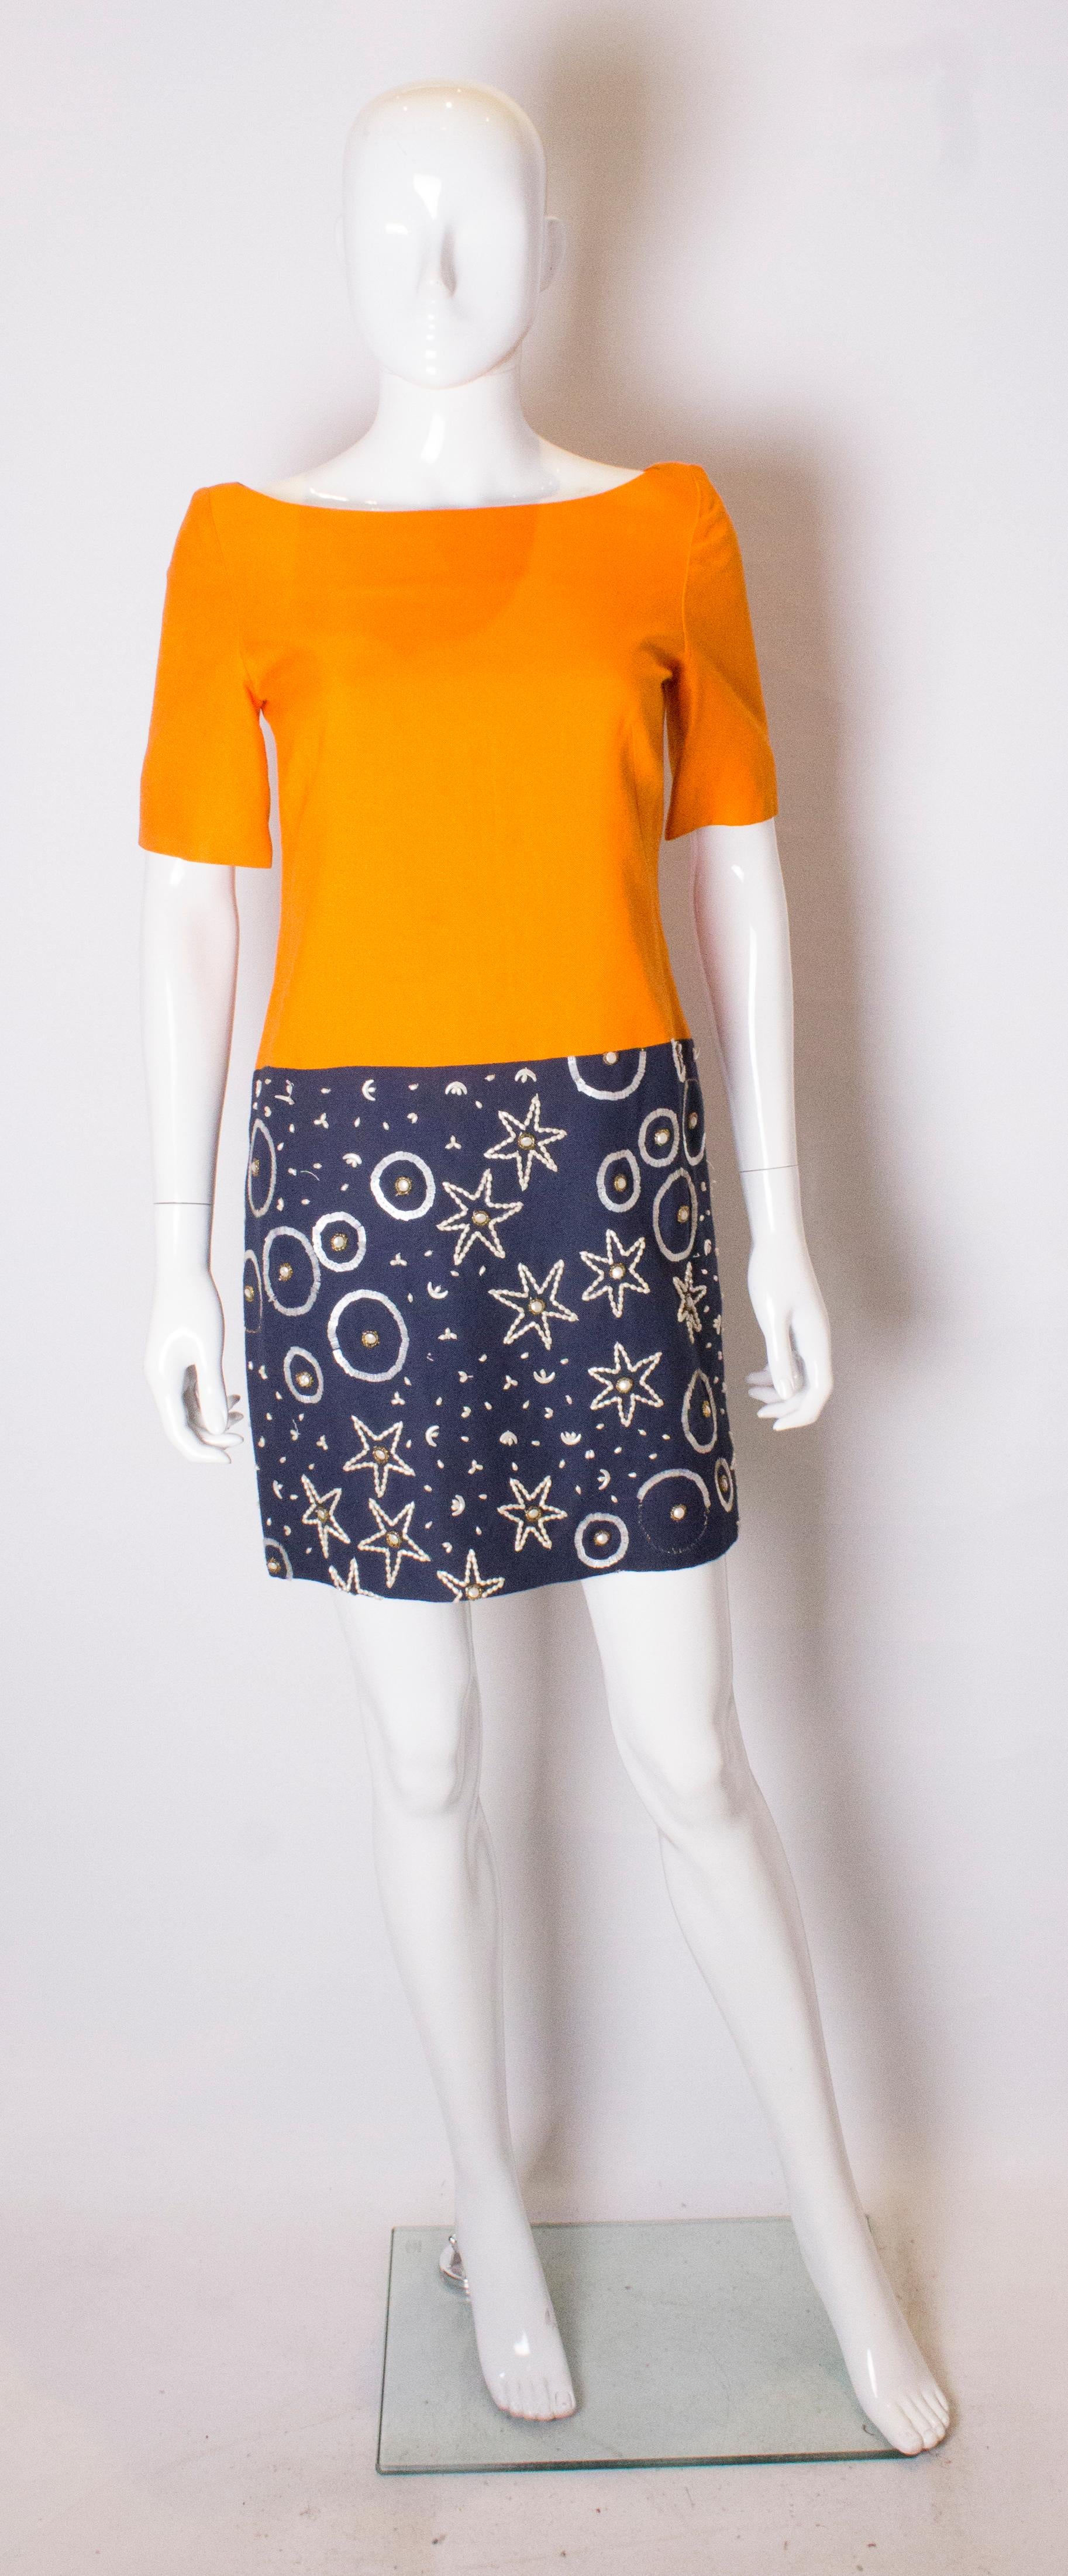 A chic cocktail dress by Tomasz Starzewski in a colourful raw silk. The upper part is in this seasons orange colour and the lower skirt is blue with bead detail. The dress is fully lined and has a central back zip.